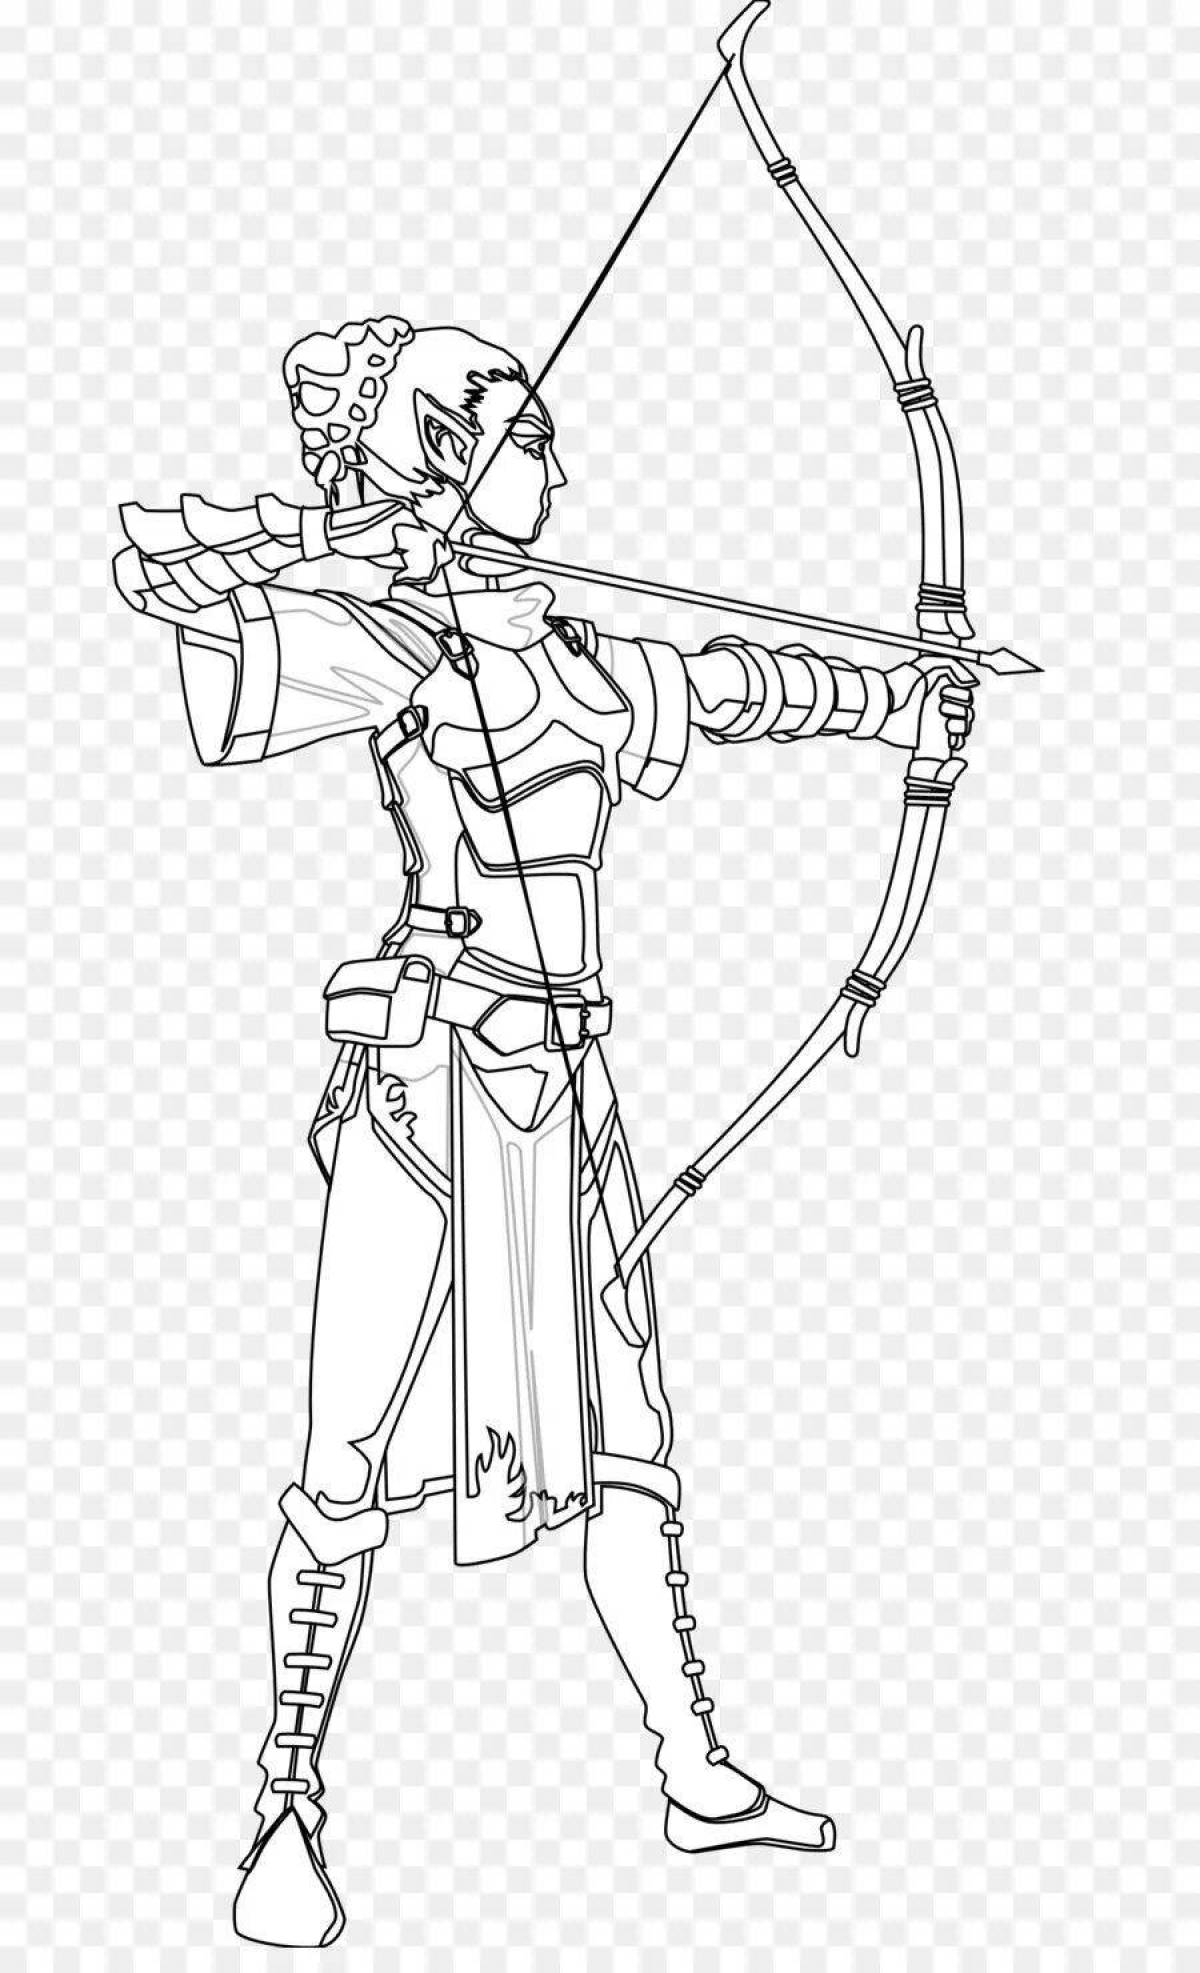 Majestic archer coloring page